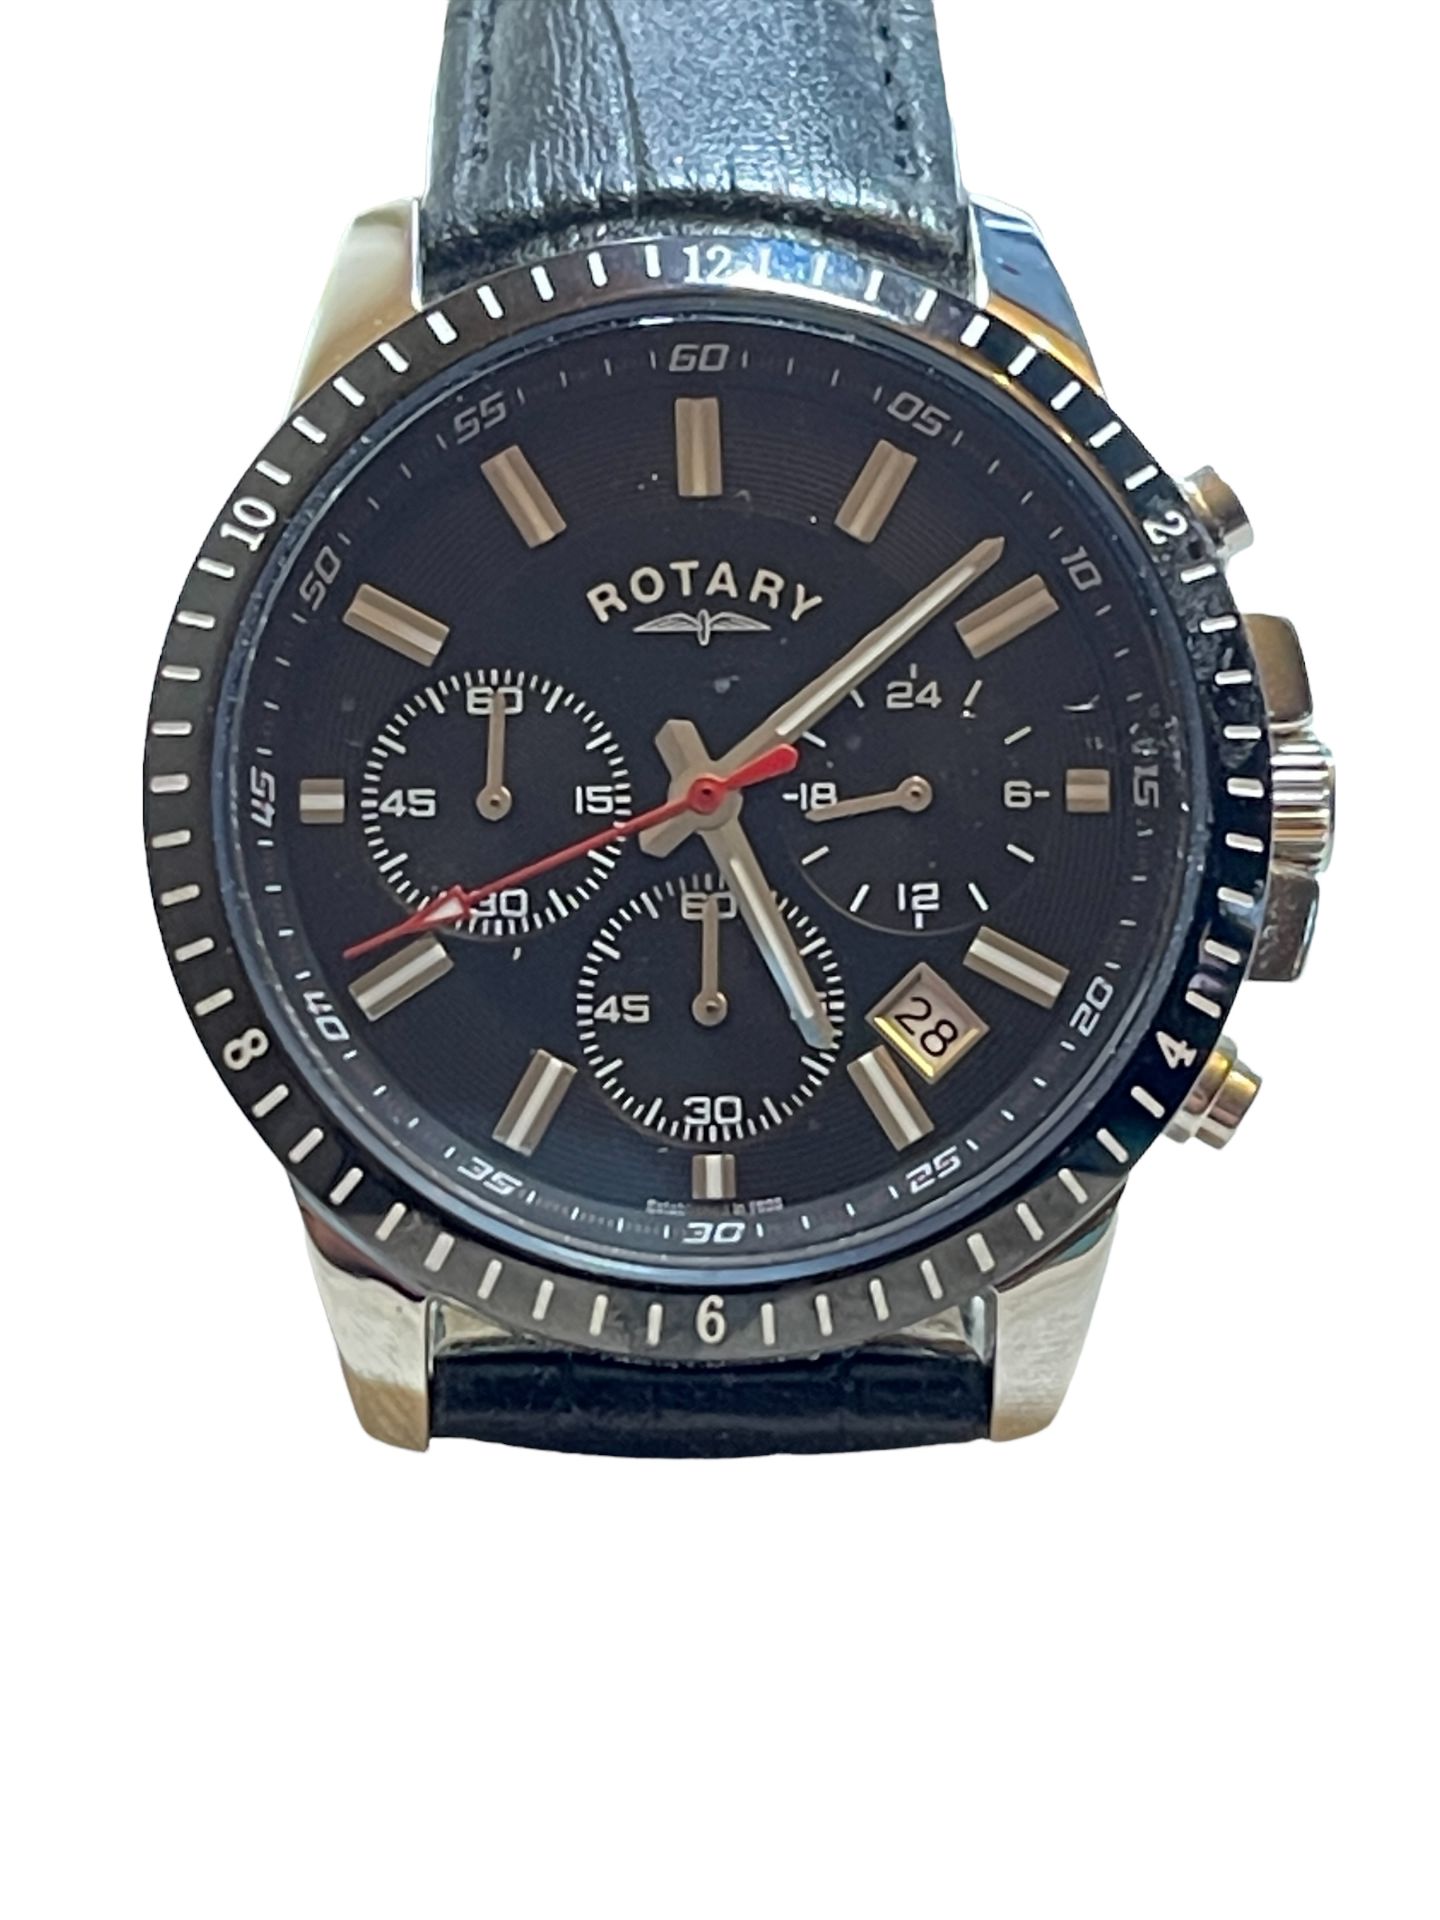 Rotary Chronograph Quartz Men's Watch - Surplus Stock from Our Private Jet Charter